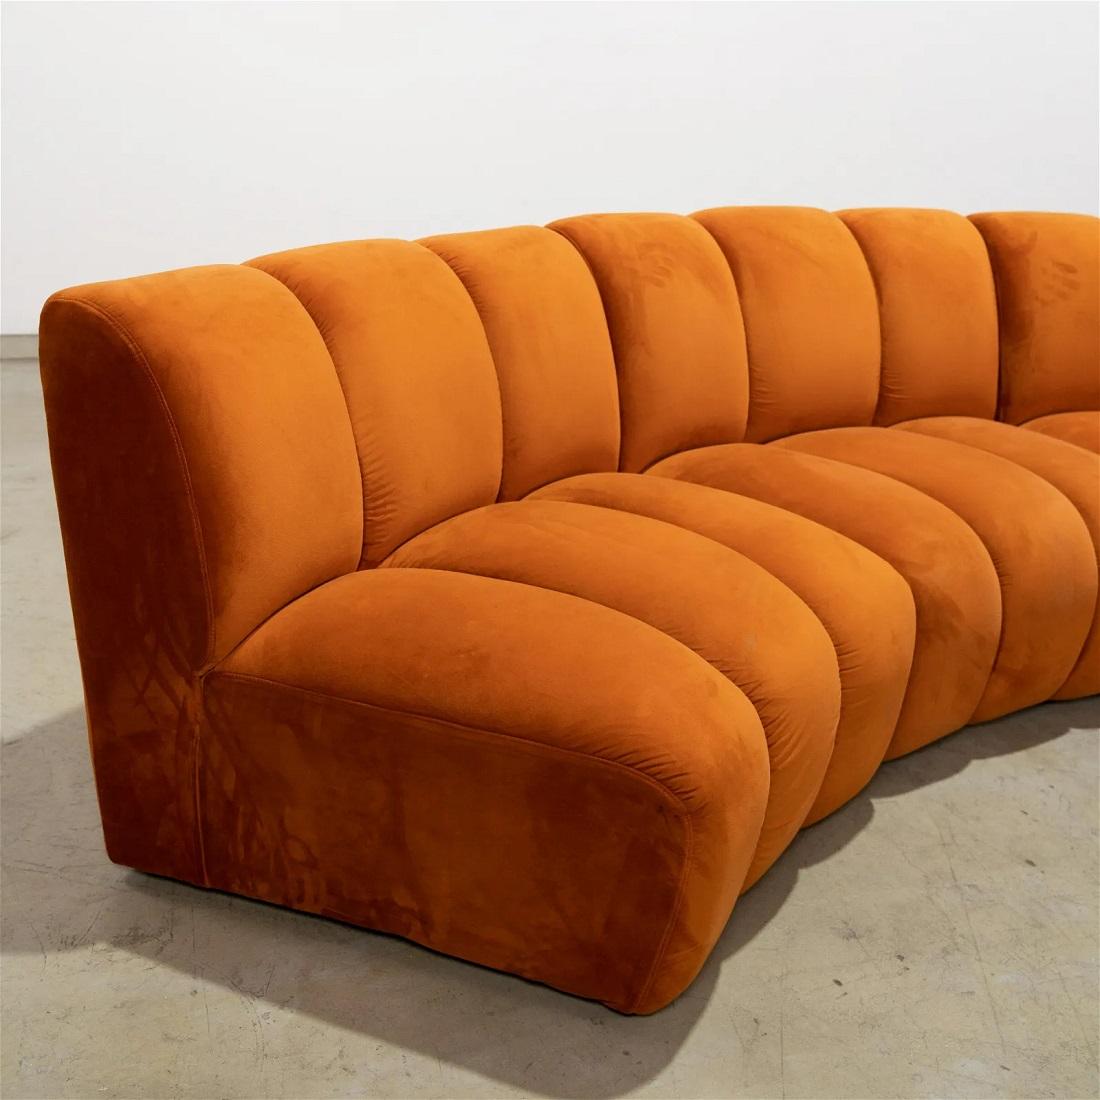 Modern four-piece channeled back sectional sofa. Curved and has the original orange velvet upholstery.
Each section - 31